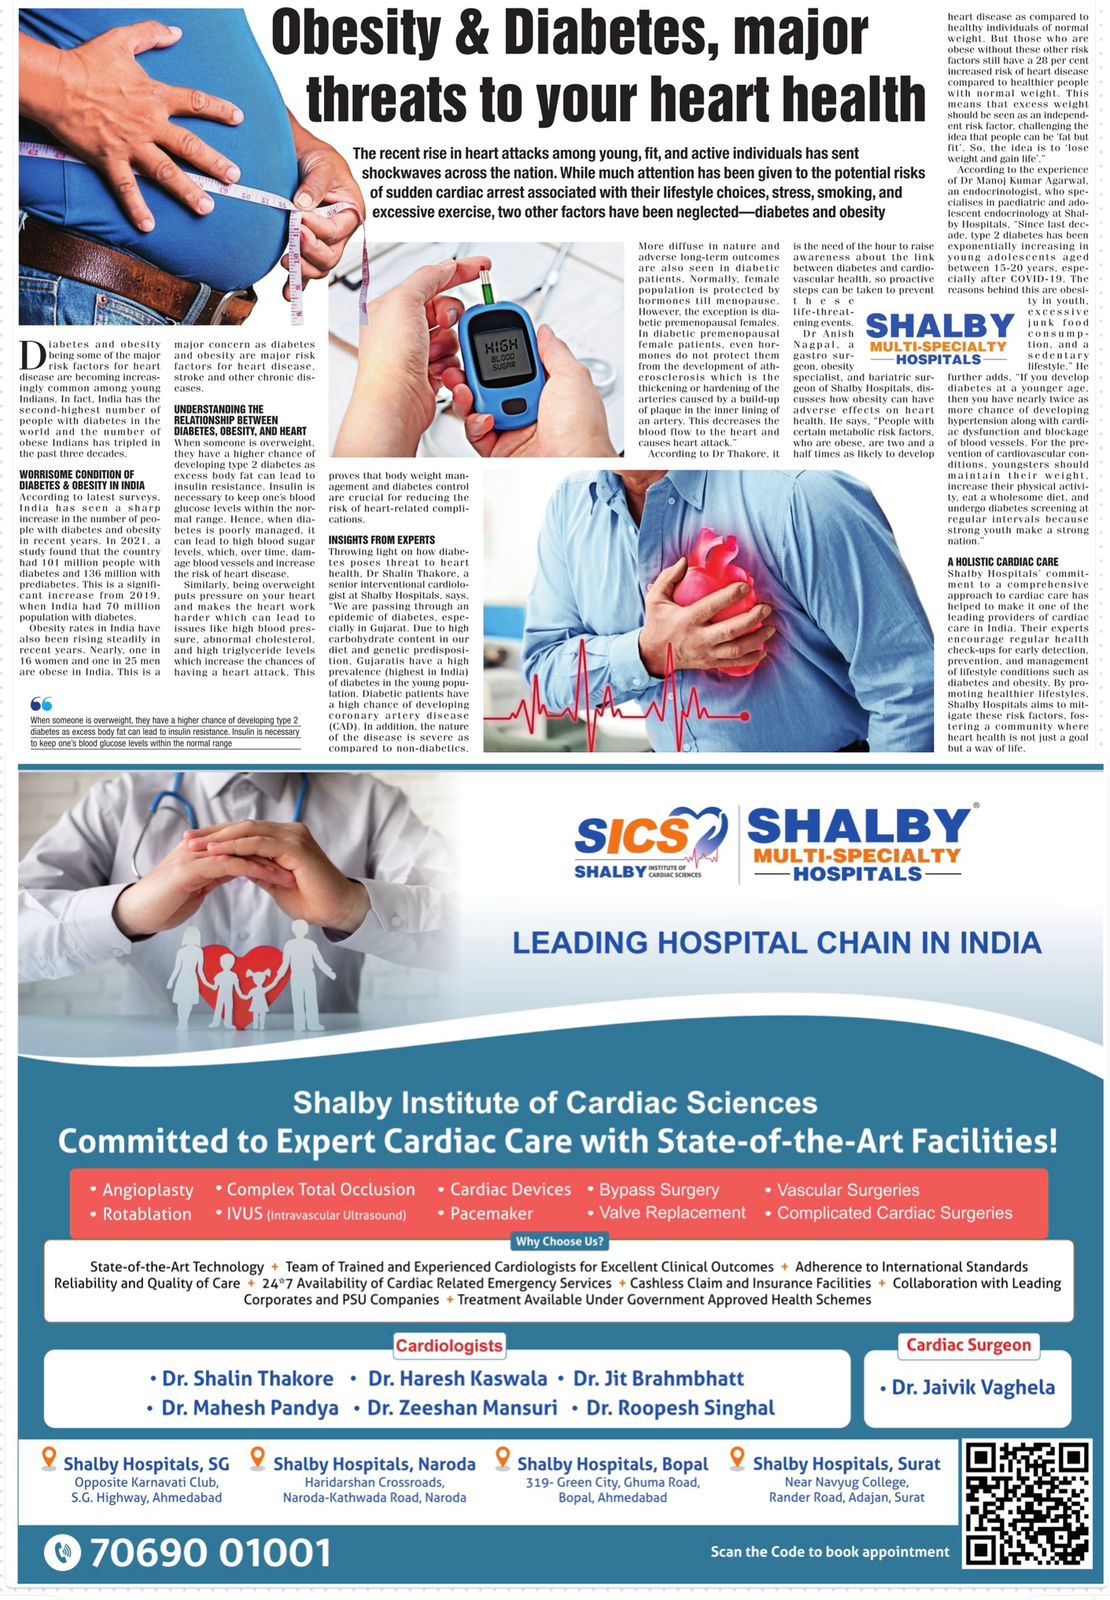 An Article was Published in the Times of India on the Occasion of World Heart Day to Decode the Relationship Between Obesity, Diabetes and Heart Health.